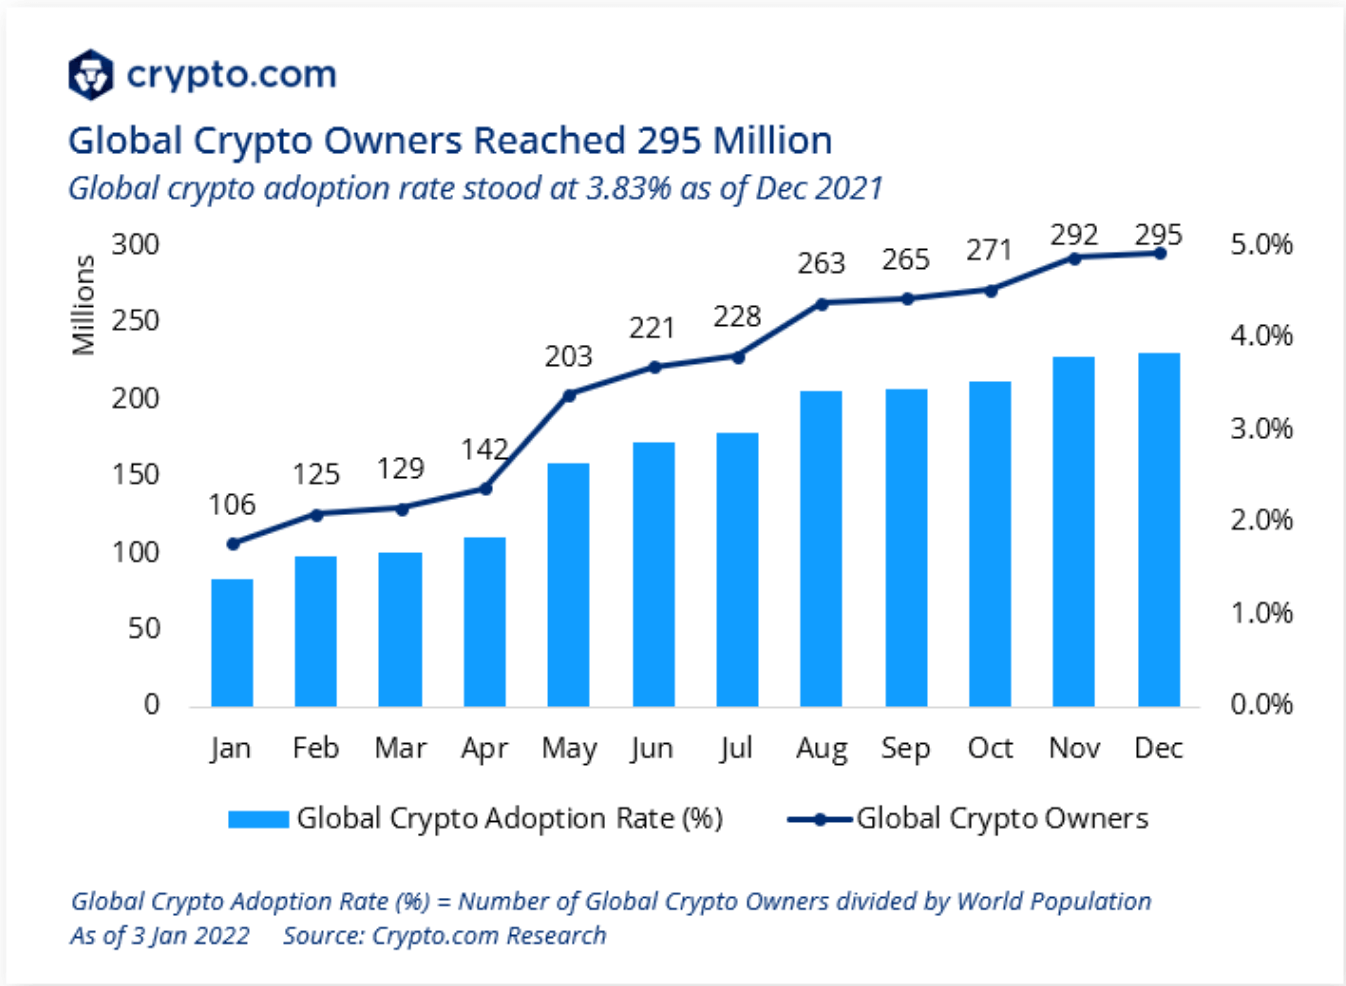 Crypto adoption rate as of Dec'21